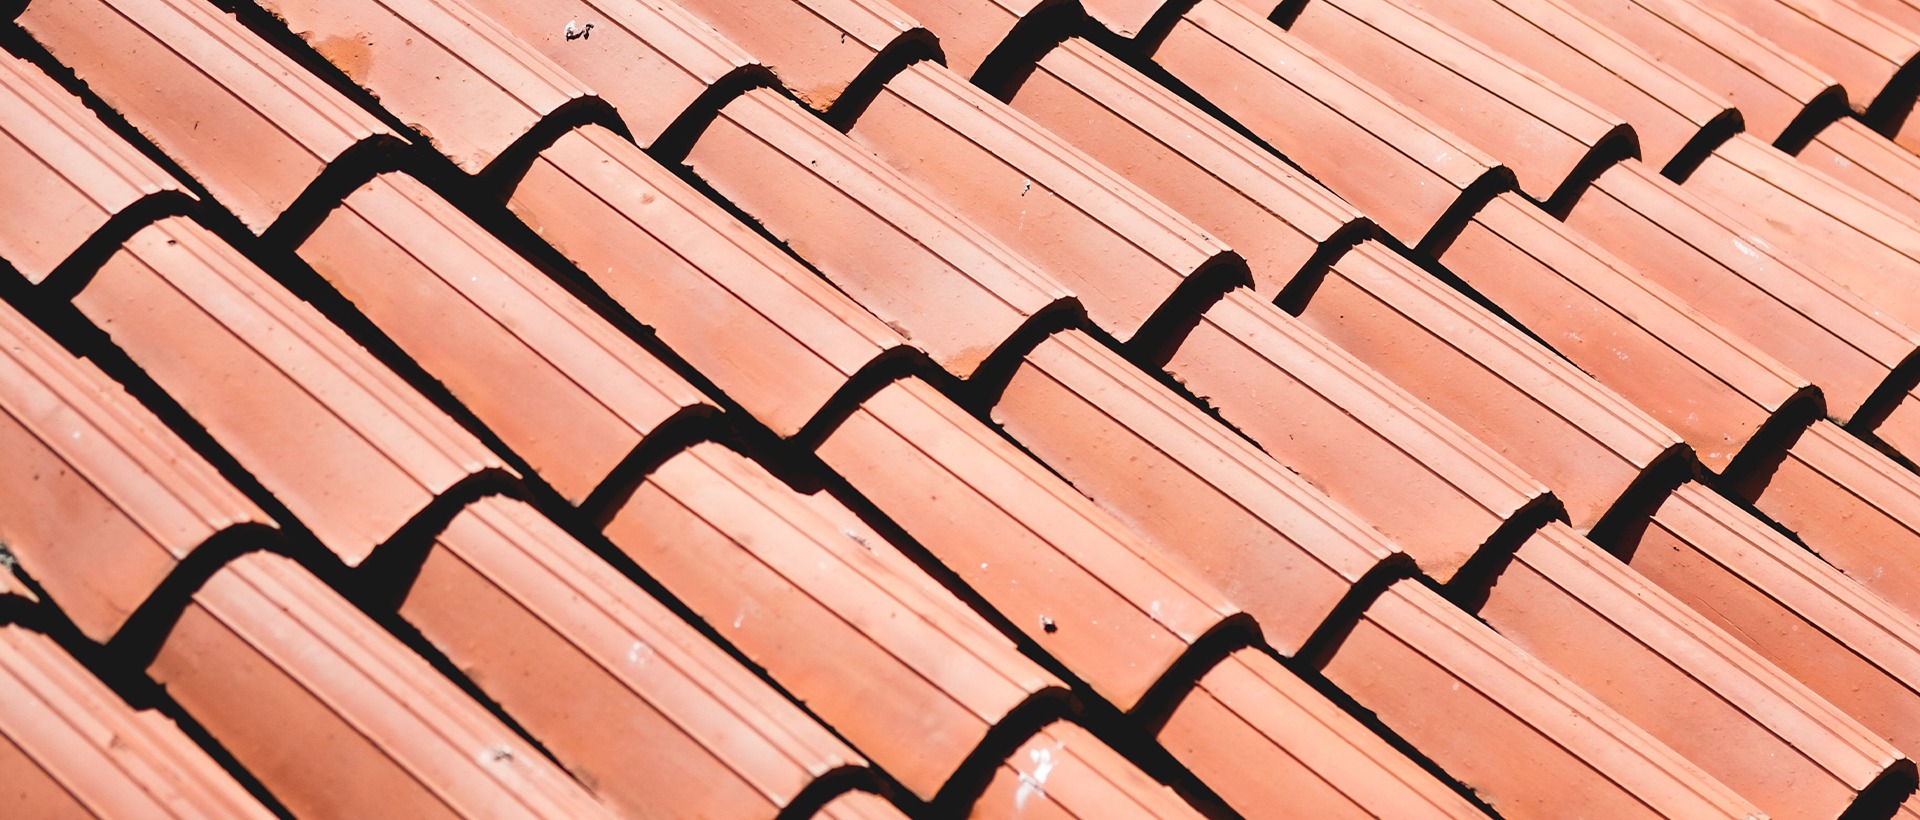 Bryan Roofer Discusses Big Differences in Roofing